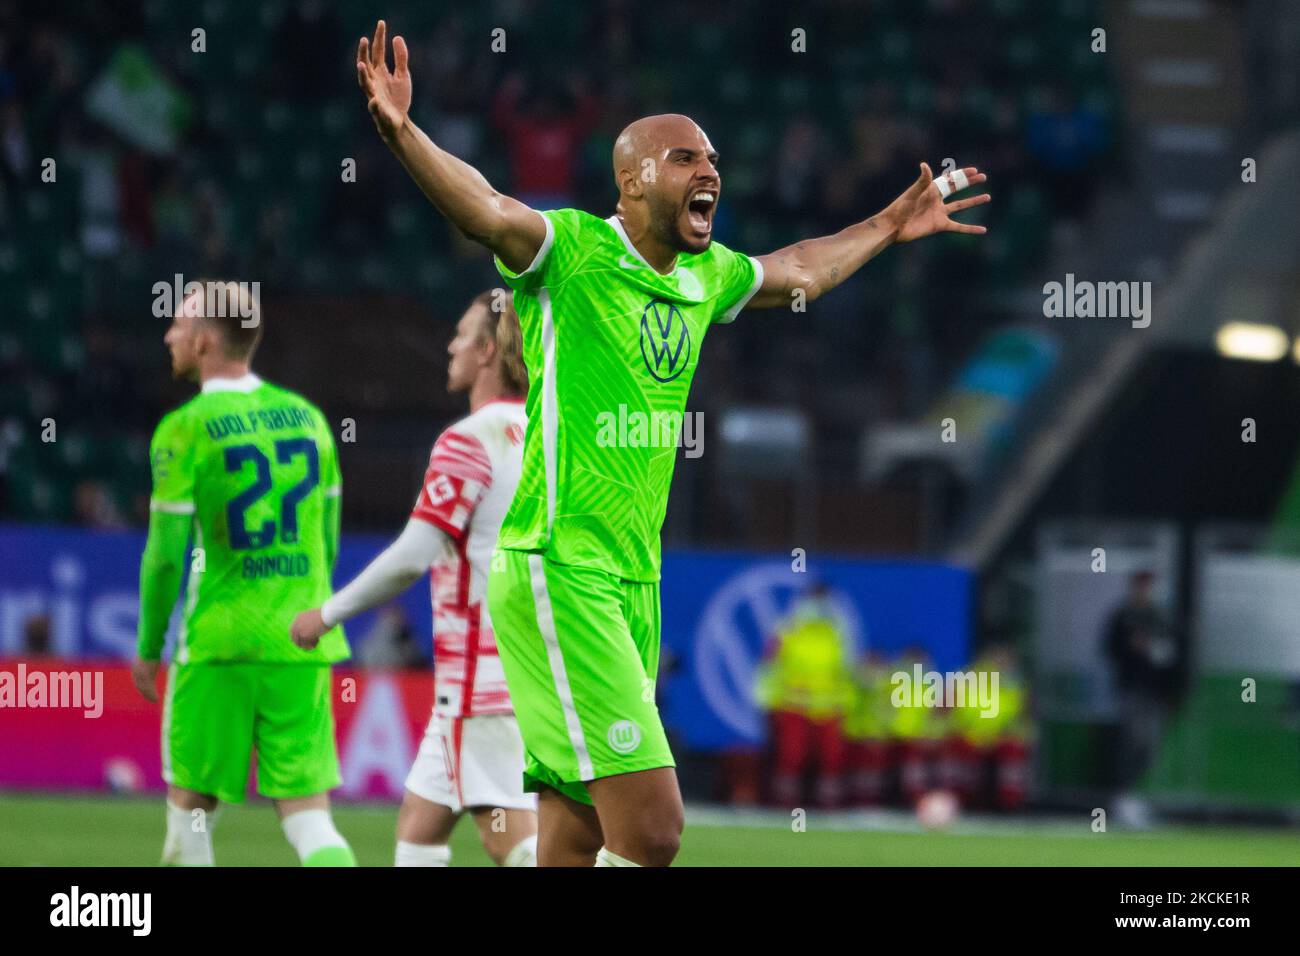 John Antony Brooks of VfL Wolfsburg celebrate following their sides victory in the Bundesliga match between VfL Wolfsburg and RB Leipzig at Volkswagen Arena on August 29, 2021 in Wolfsburg, Germany. (Photo by Peter Niedung/NurPhoto) Stock Photo